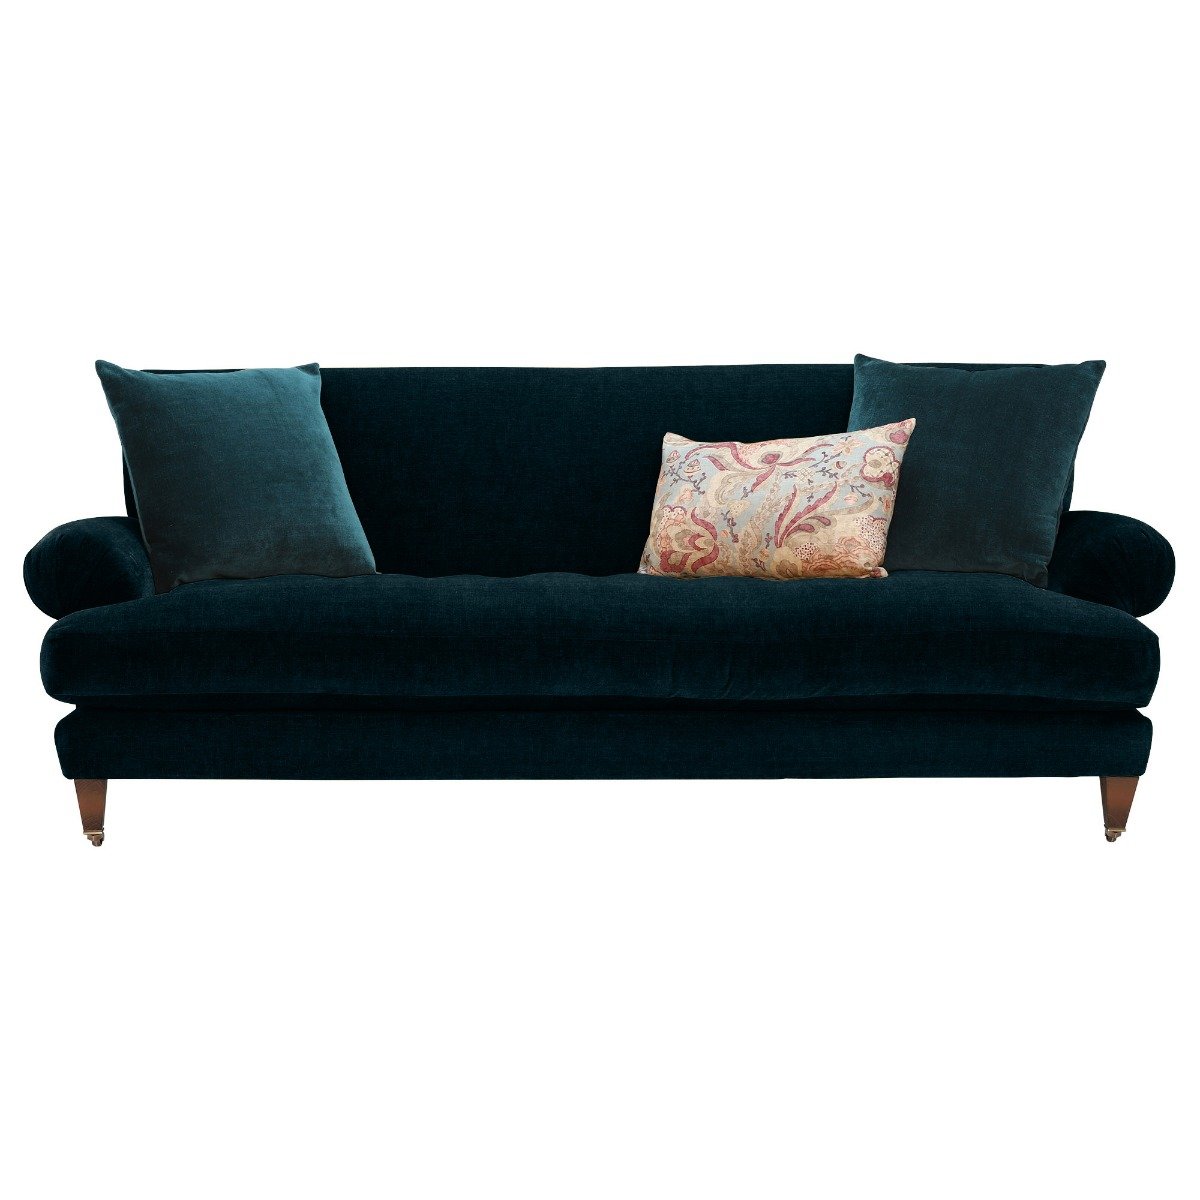 Durant 4 Seater Sofa, Teal Fabric | Barker & Stonehouse